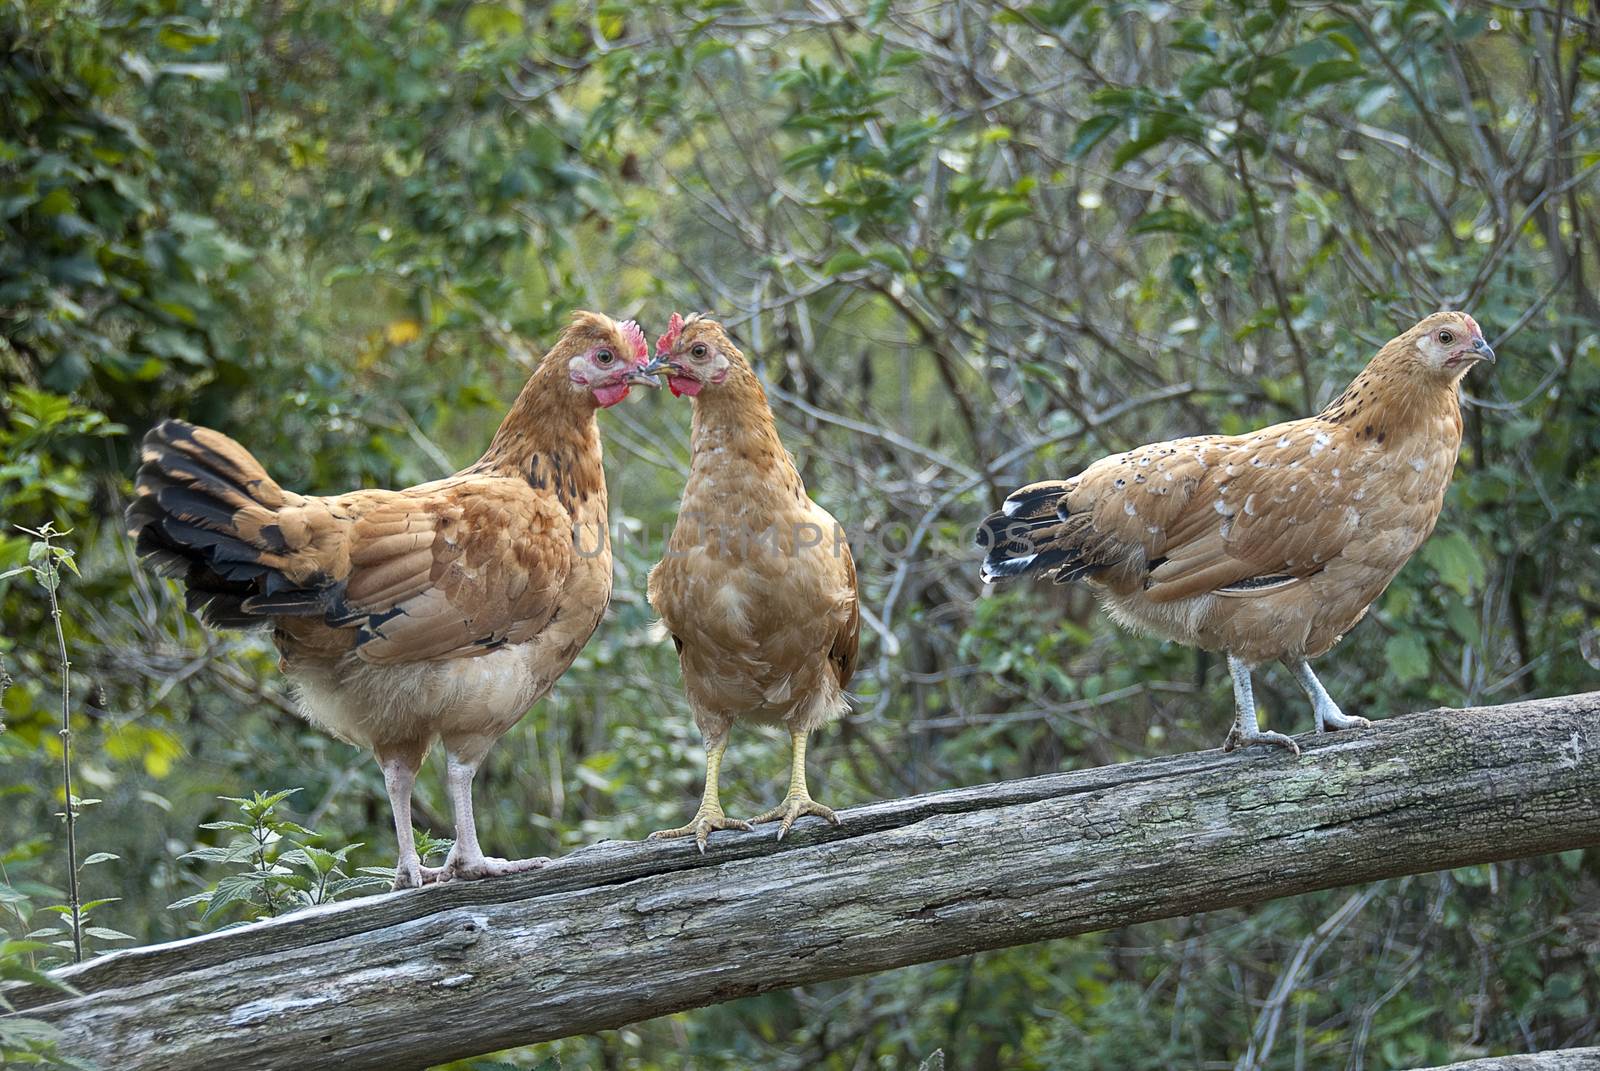 Three Hens raised to a trunk by jalonsohu@gmail.com